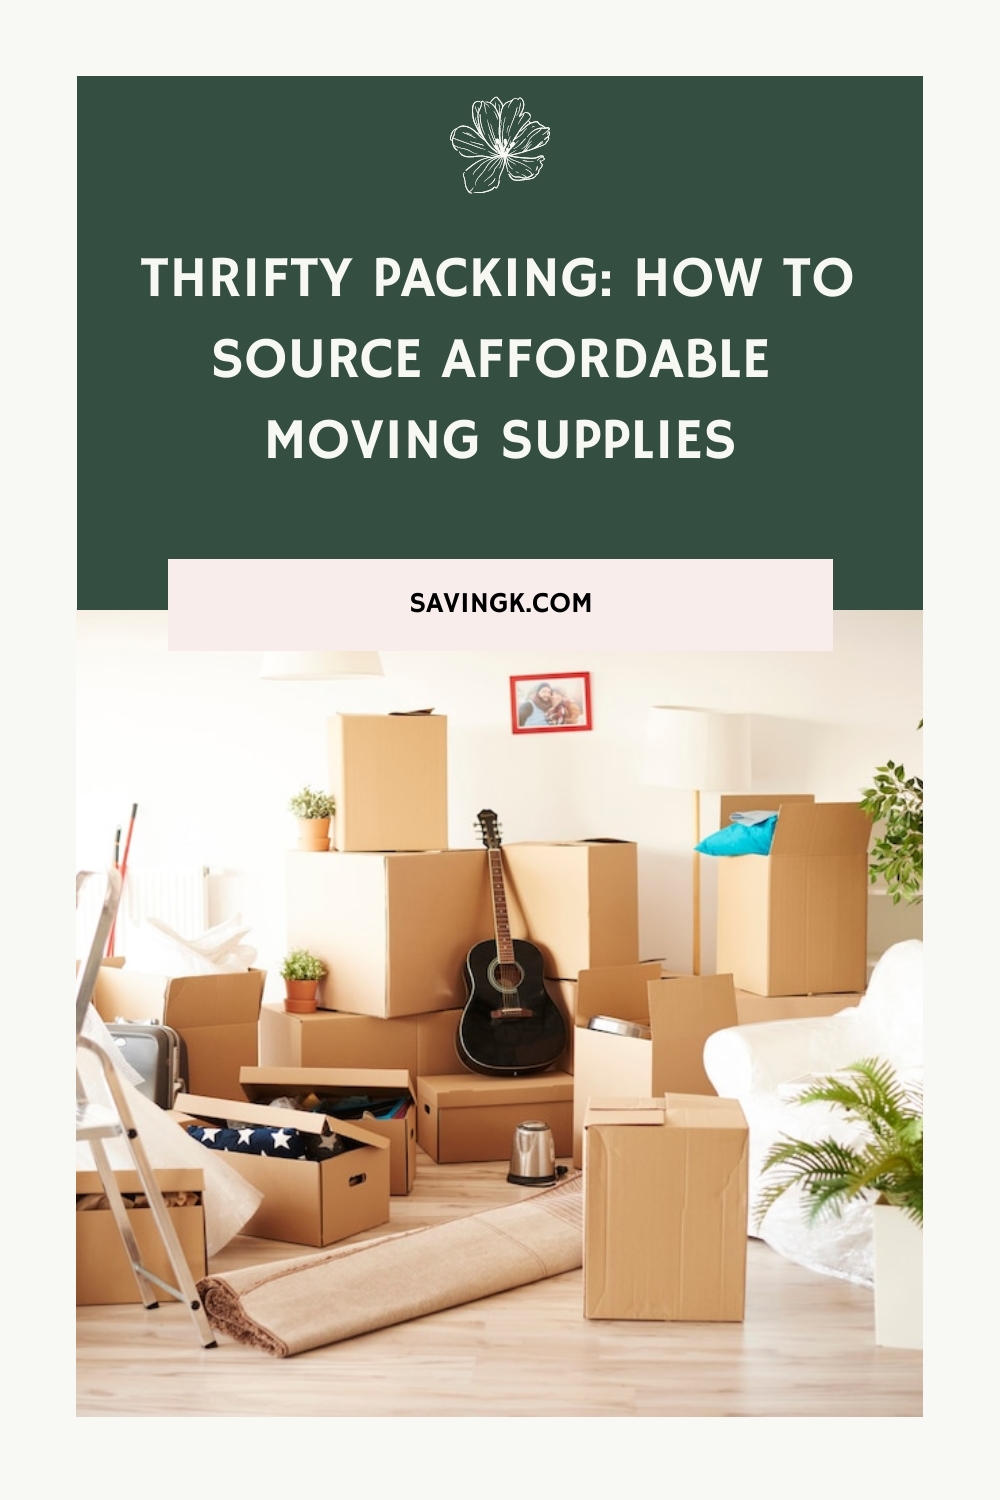 Thrifty Packing: How to Source Affordable Moving Supplies